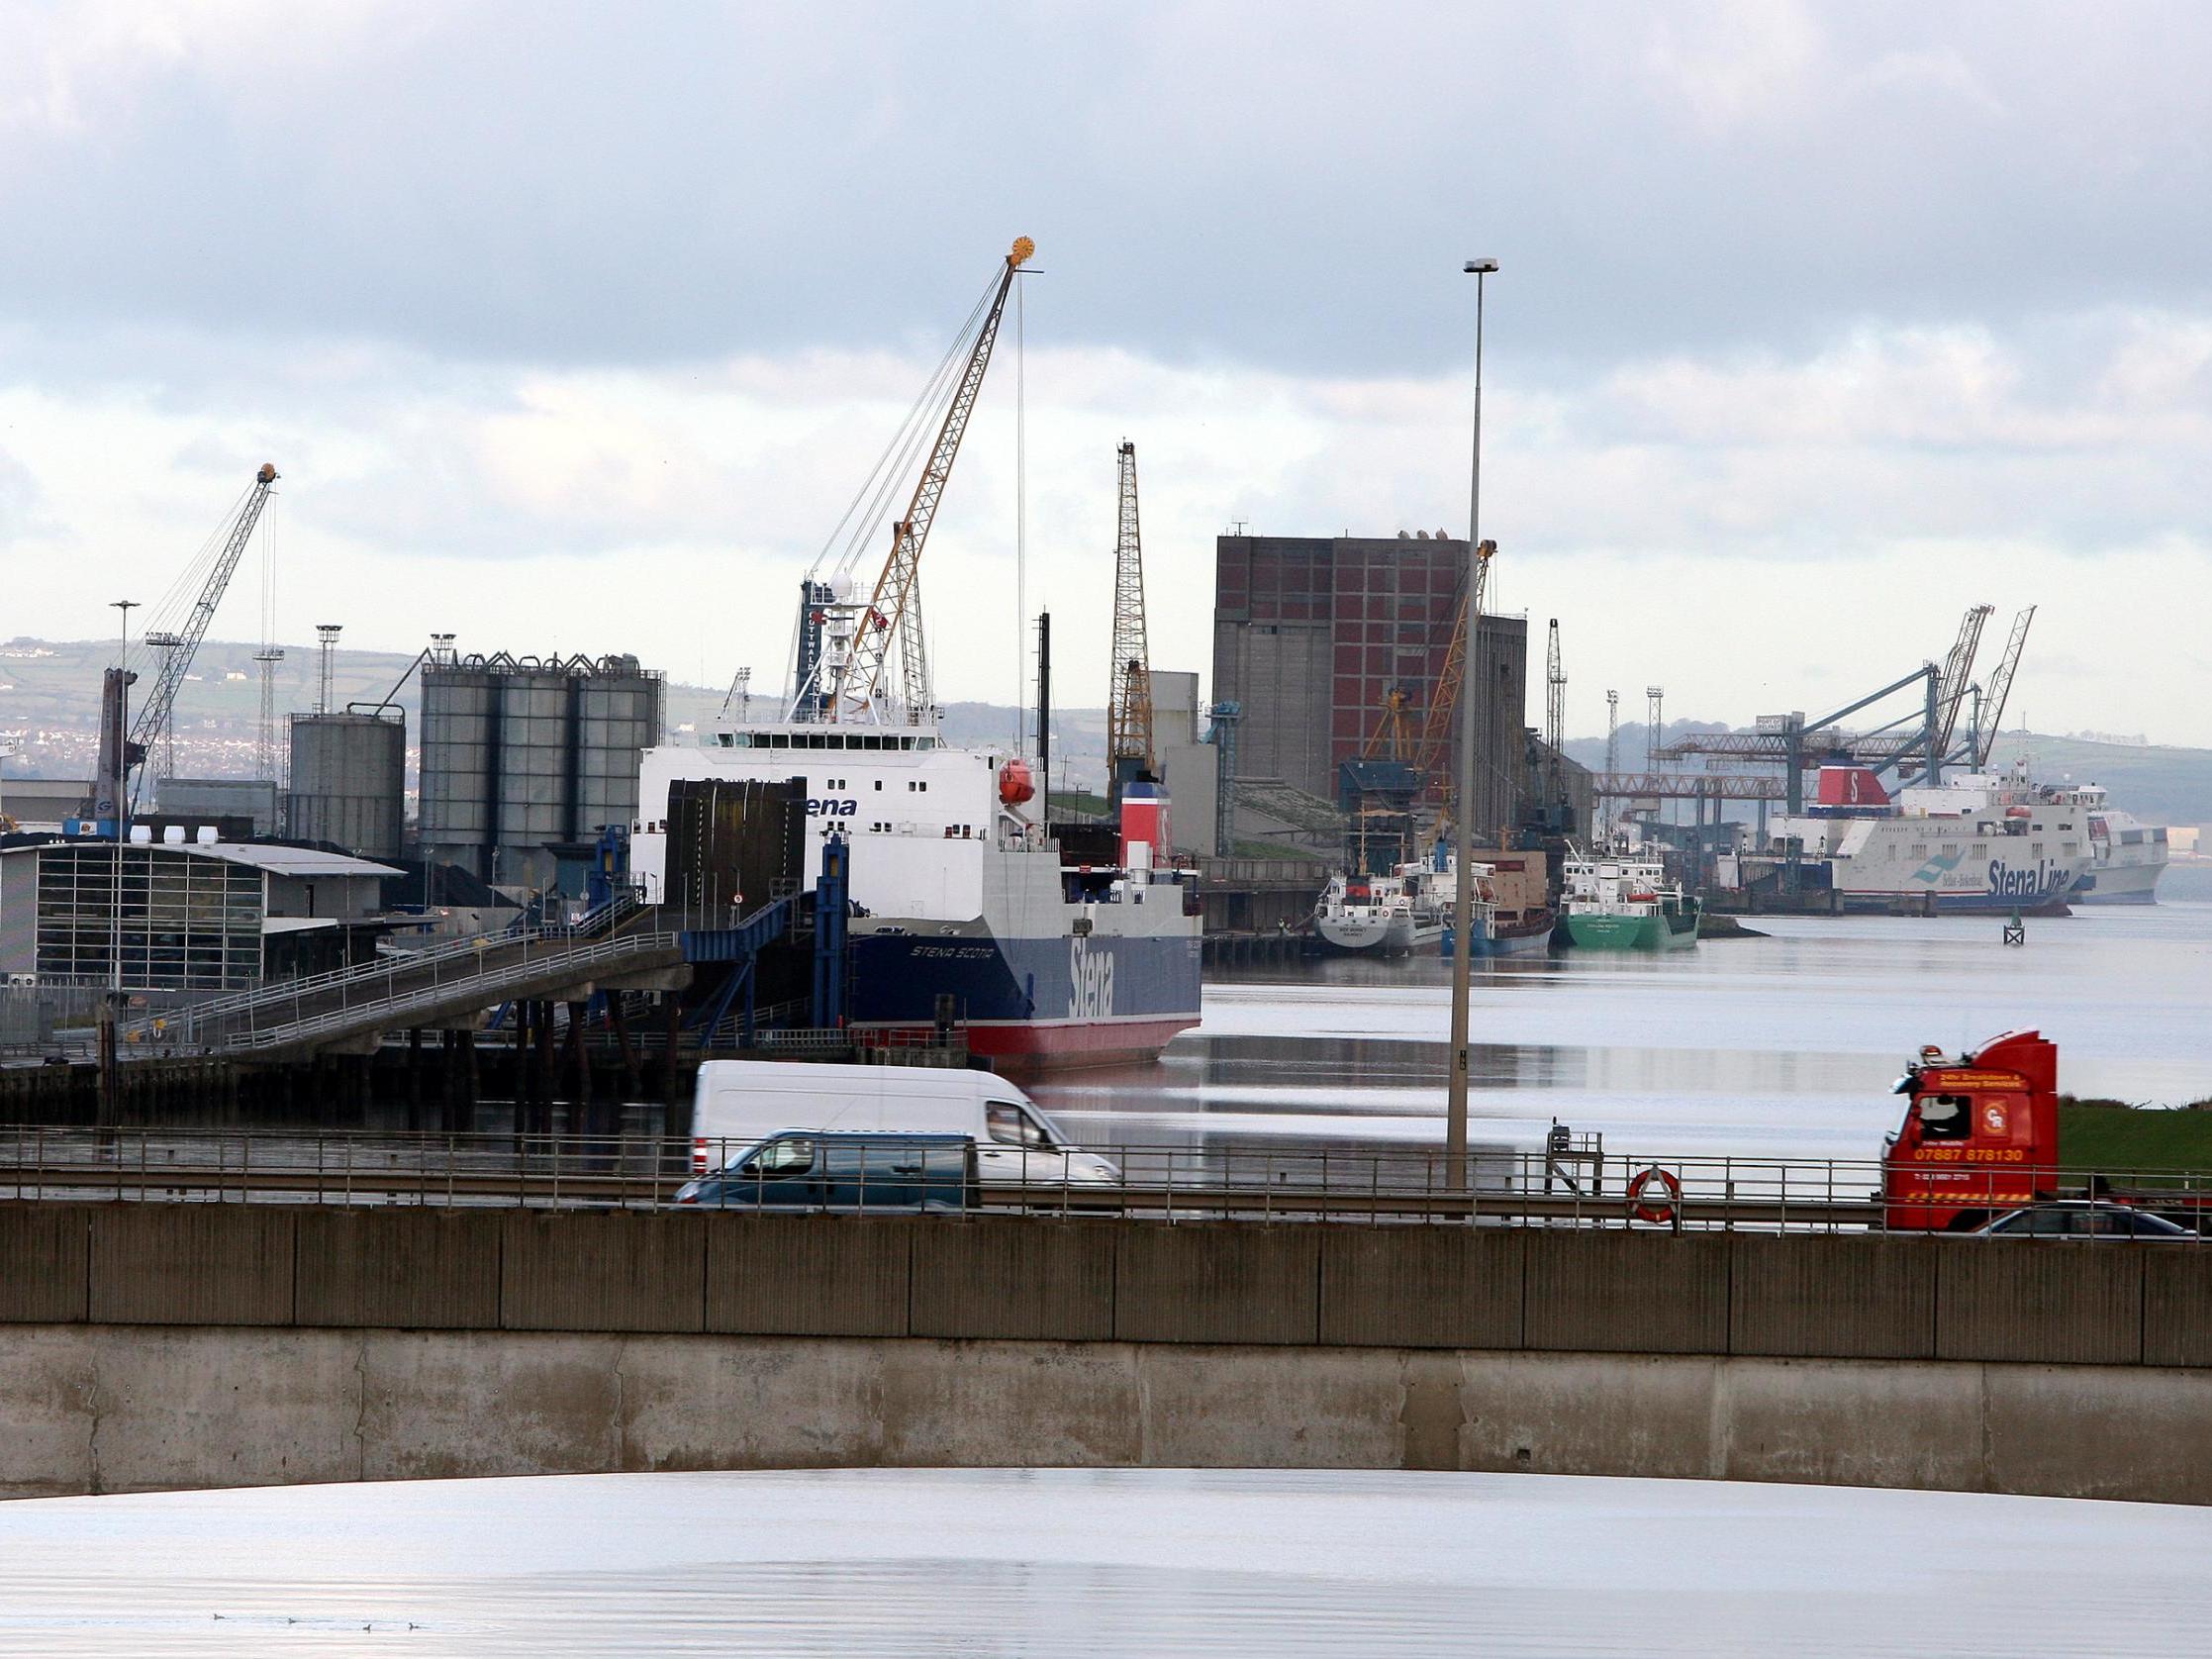 Belfast port. The Withdrawal Agreement was designed to prevent checks cannot be carried on goods near the border between Ireland and Northern Ireland